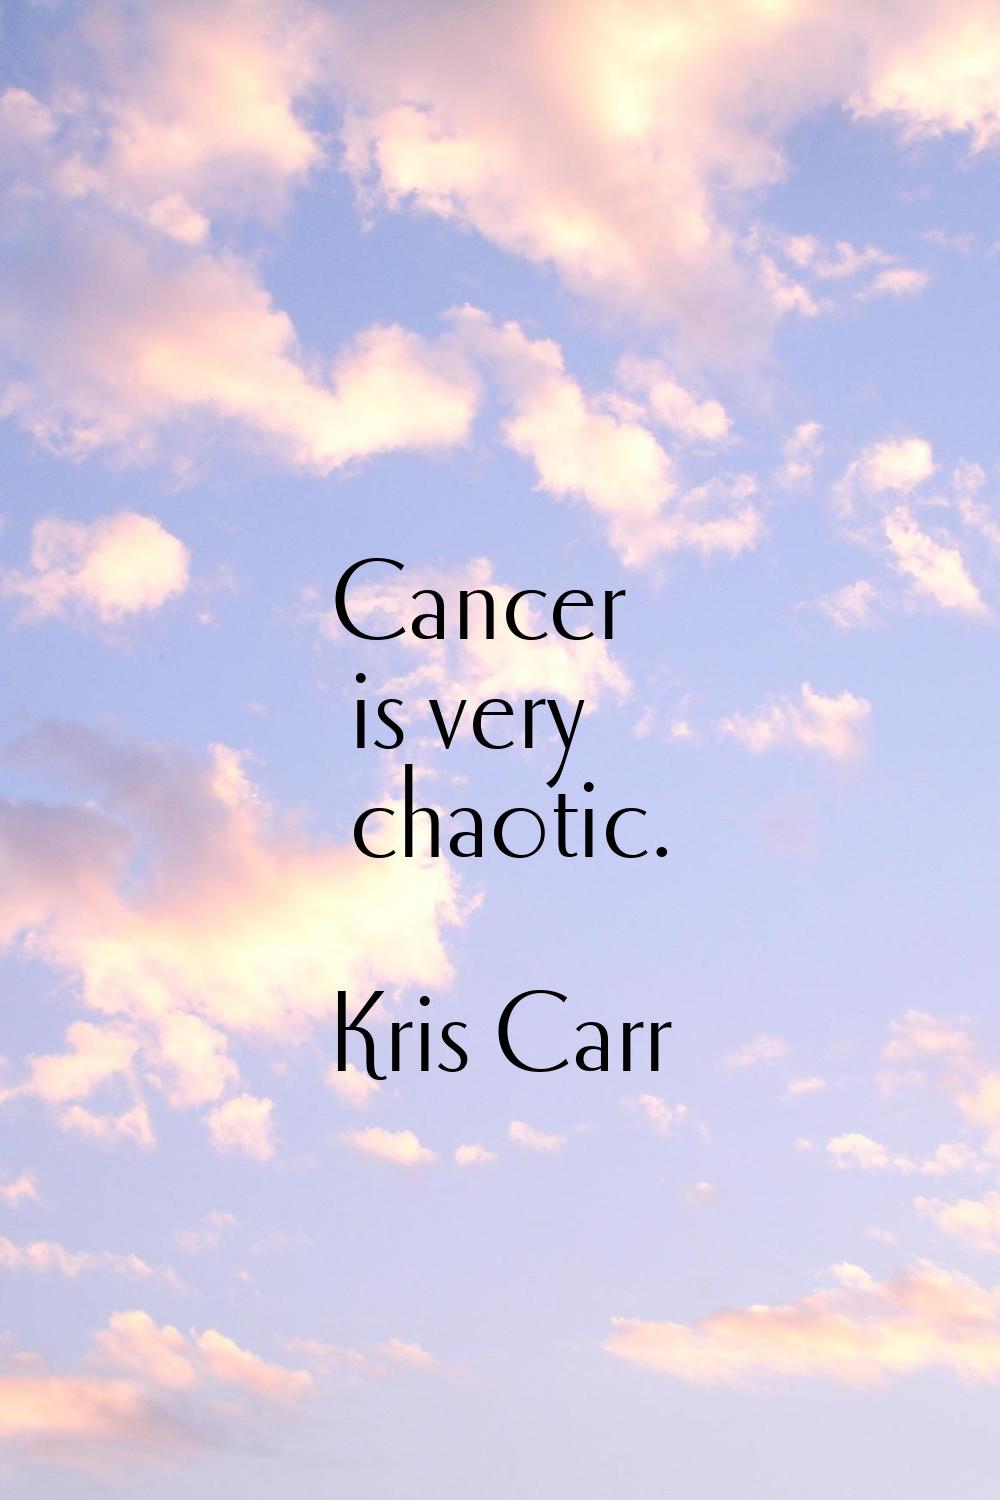 Cancer is very chaotic.